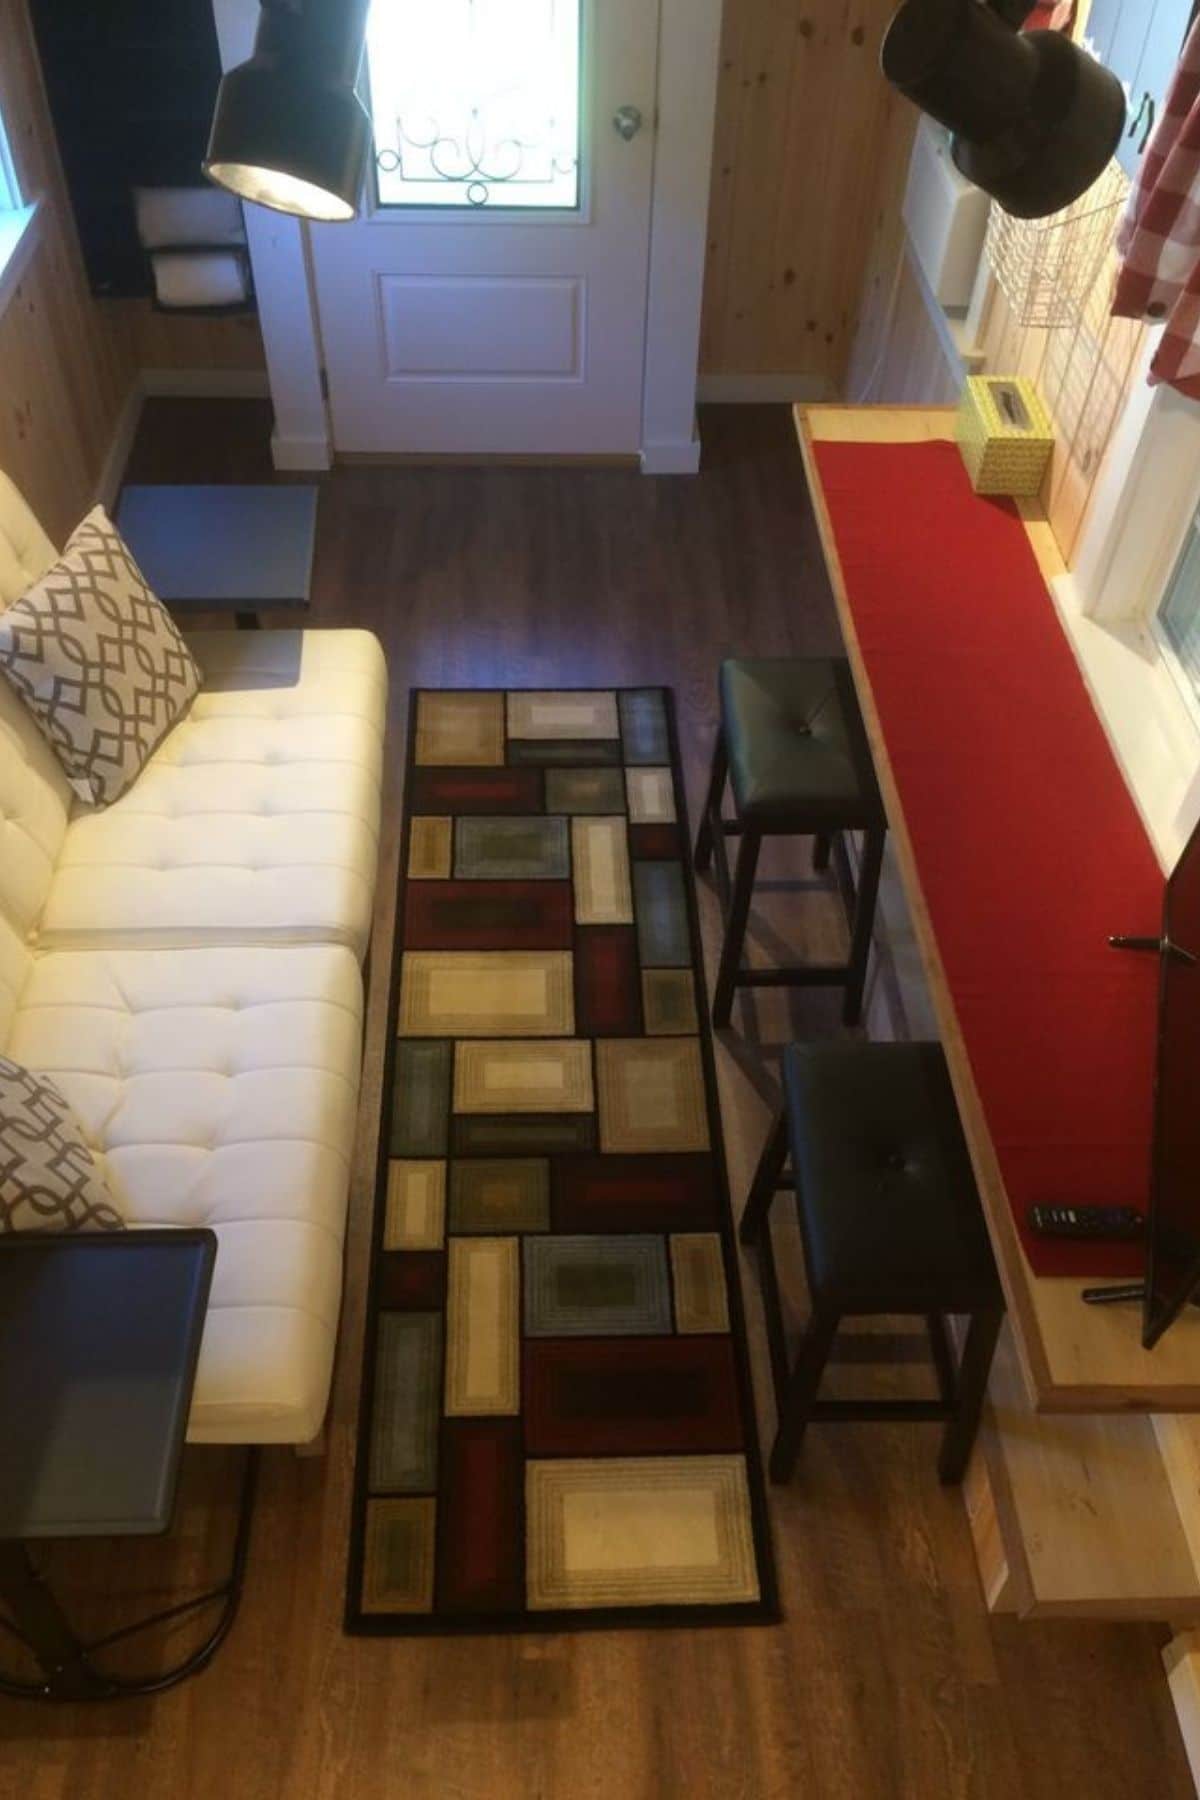 view down on living room from tiny home loft showing white sofa, counter under window, and colorful rug in center of room